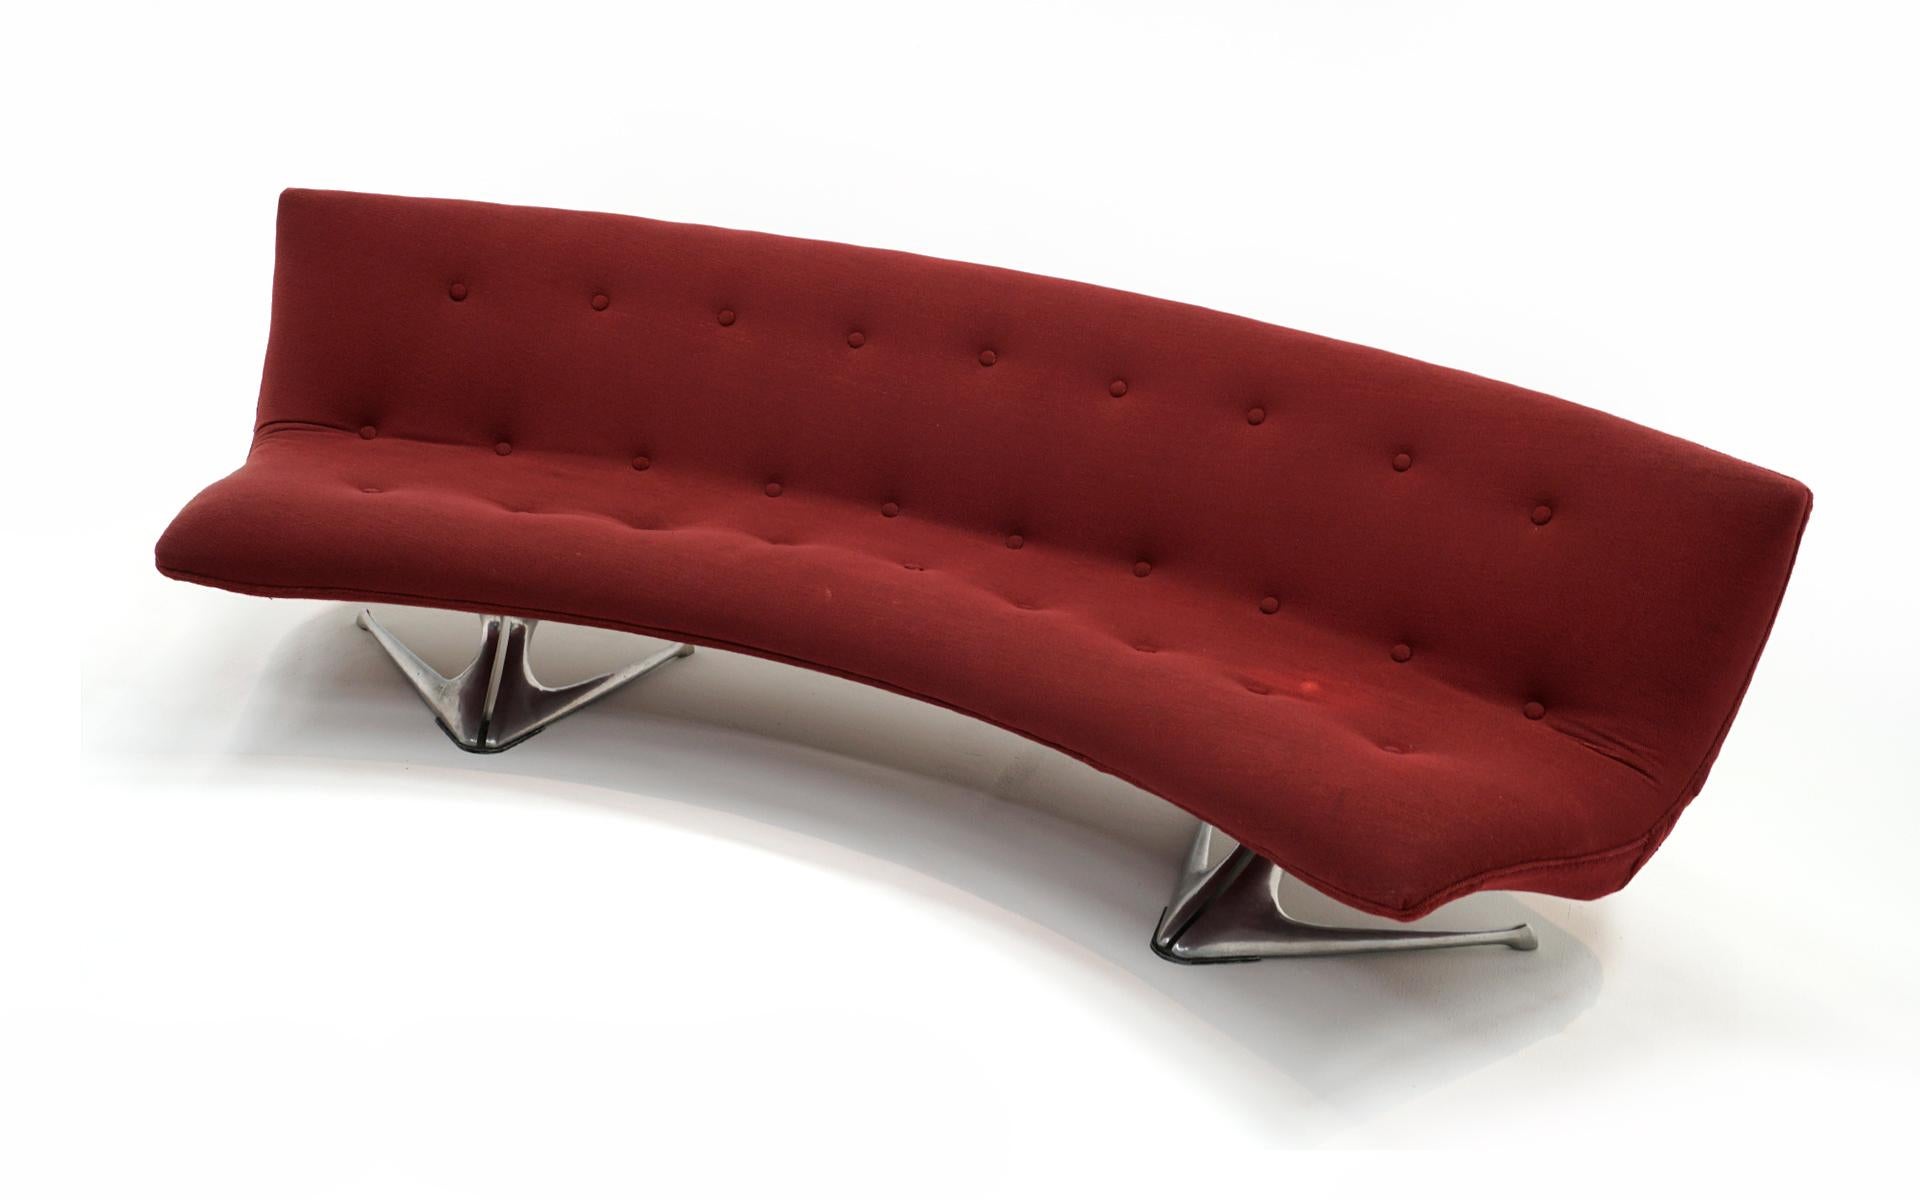 This original Vladimir Kagan Curved Unicorn sofa has had only one owner and was purchased directly from Vladimir Kagan Designs, Inc. in 1967.  The design is from 1963.  The sofa retains its original fabric with signs of wear and small stains.  The